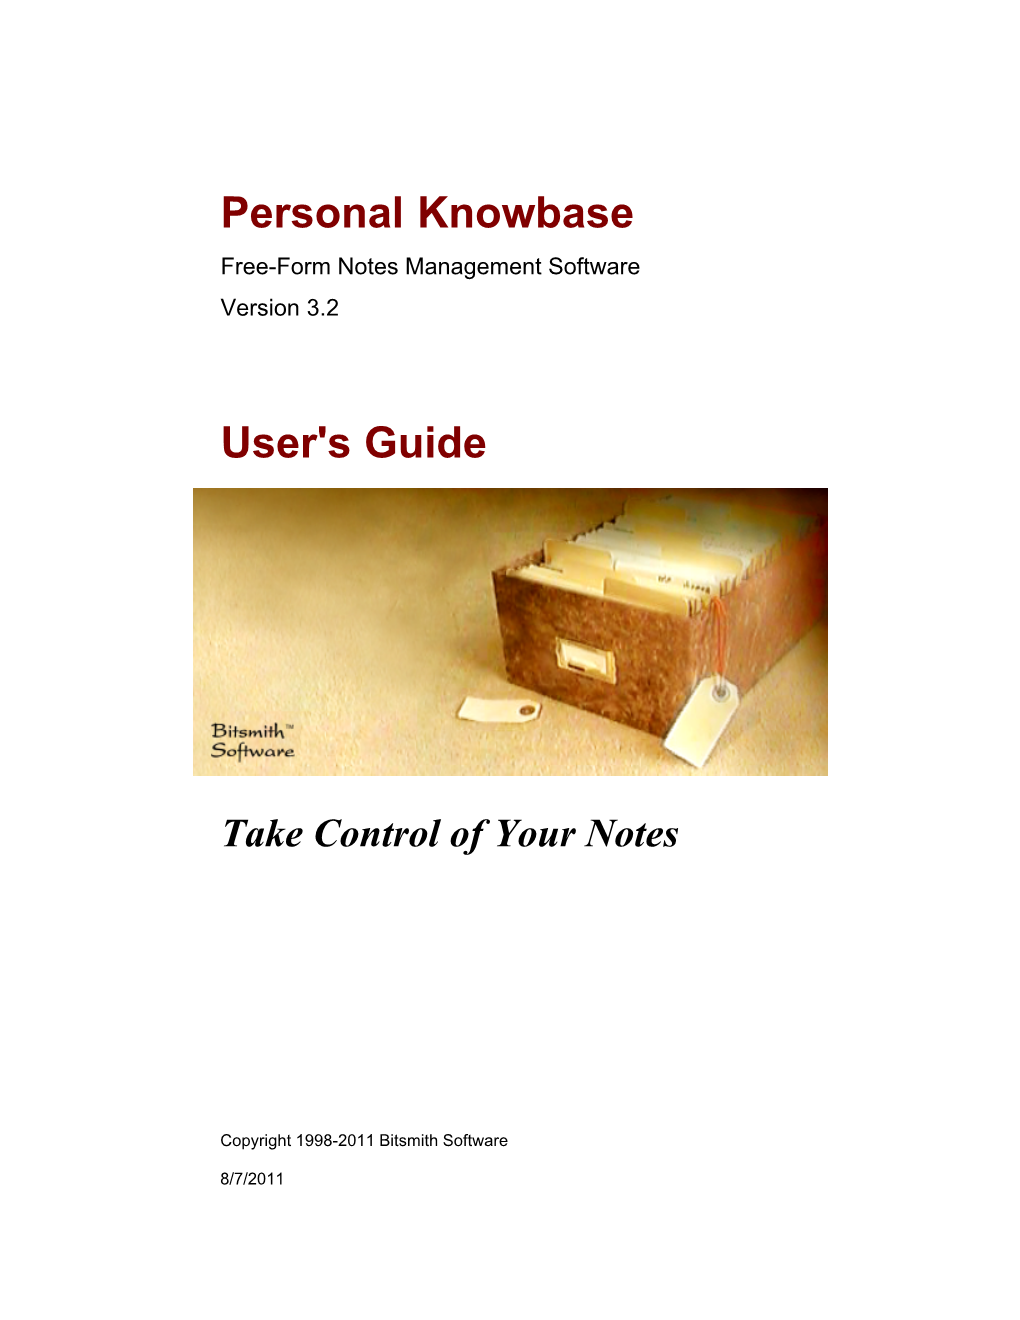 Personal Knowbase Free-Form Notes Management Software Version 3.2